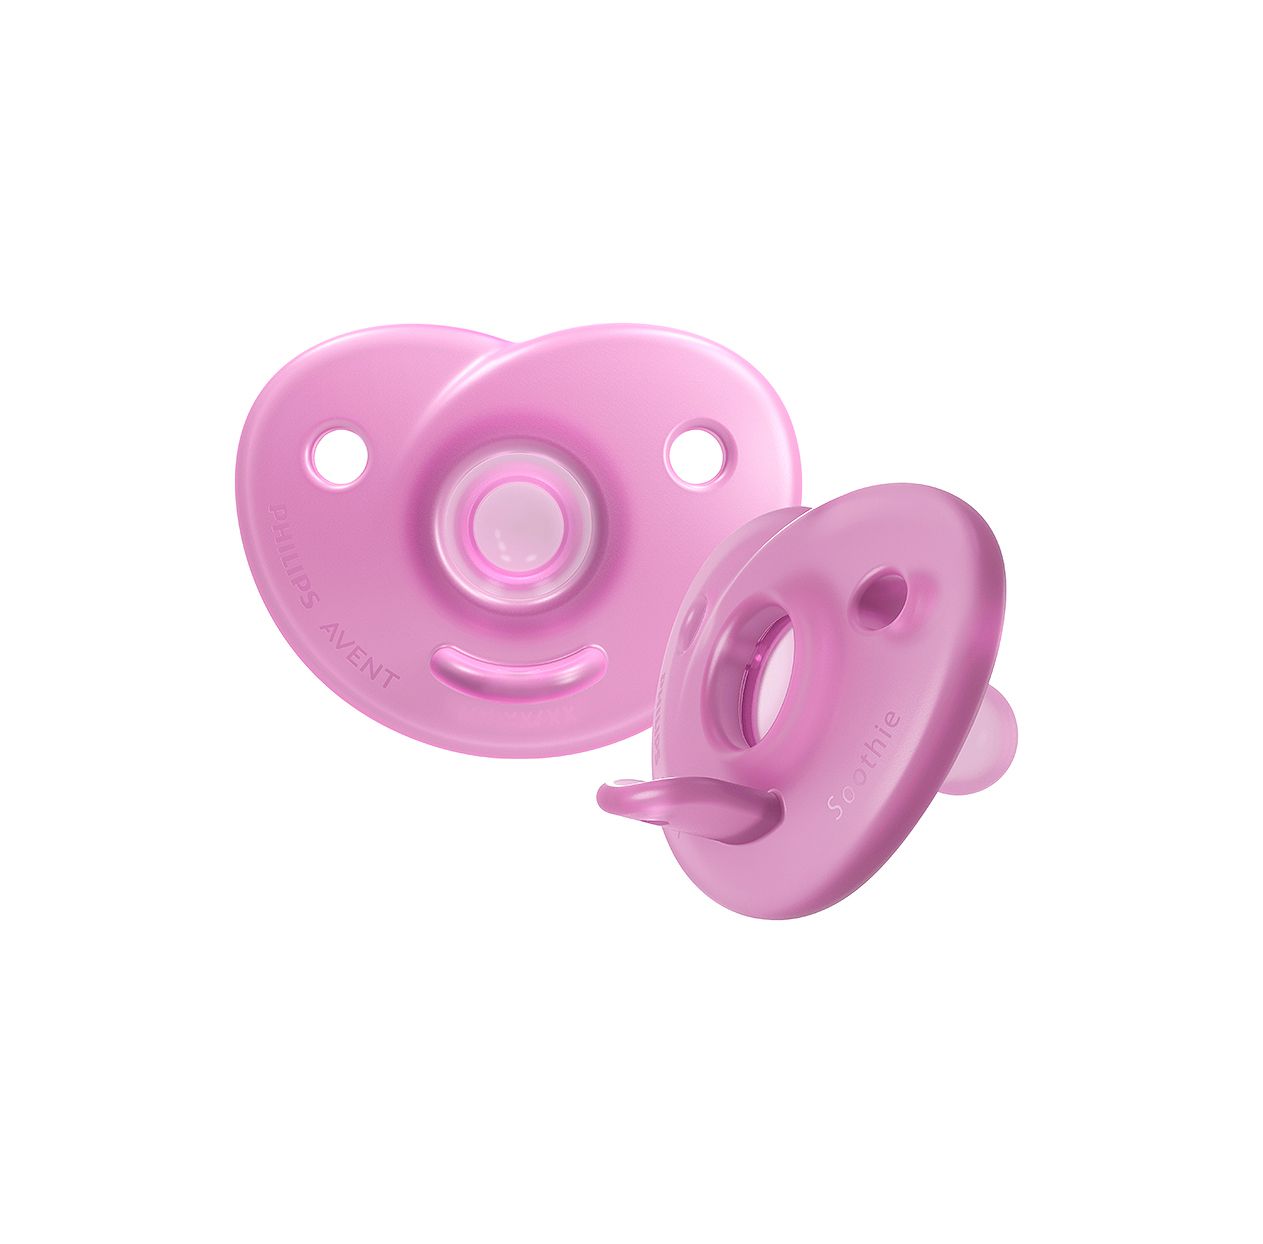 Philips Avent Soothie Heart pink pacifier